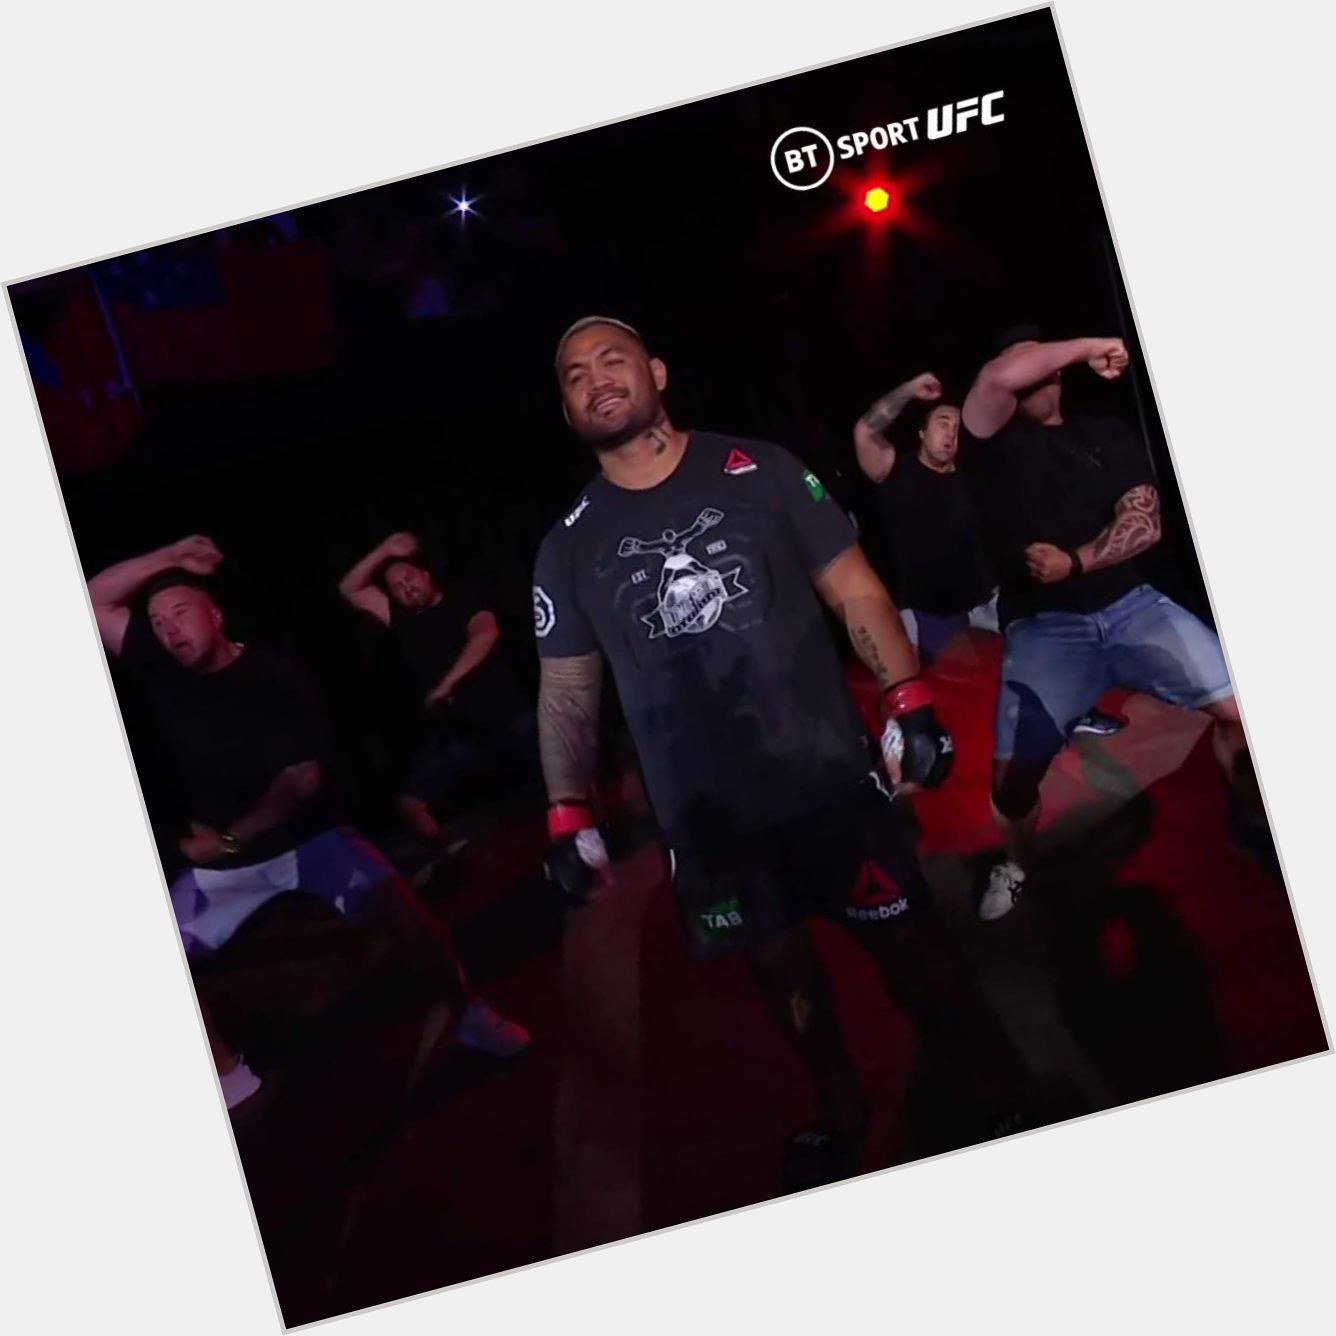 Happy Birthday to the one and only Mark Hunt!

Flashback to when he brought the Haka to the Octagon 